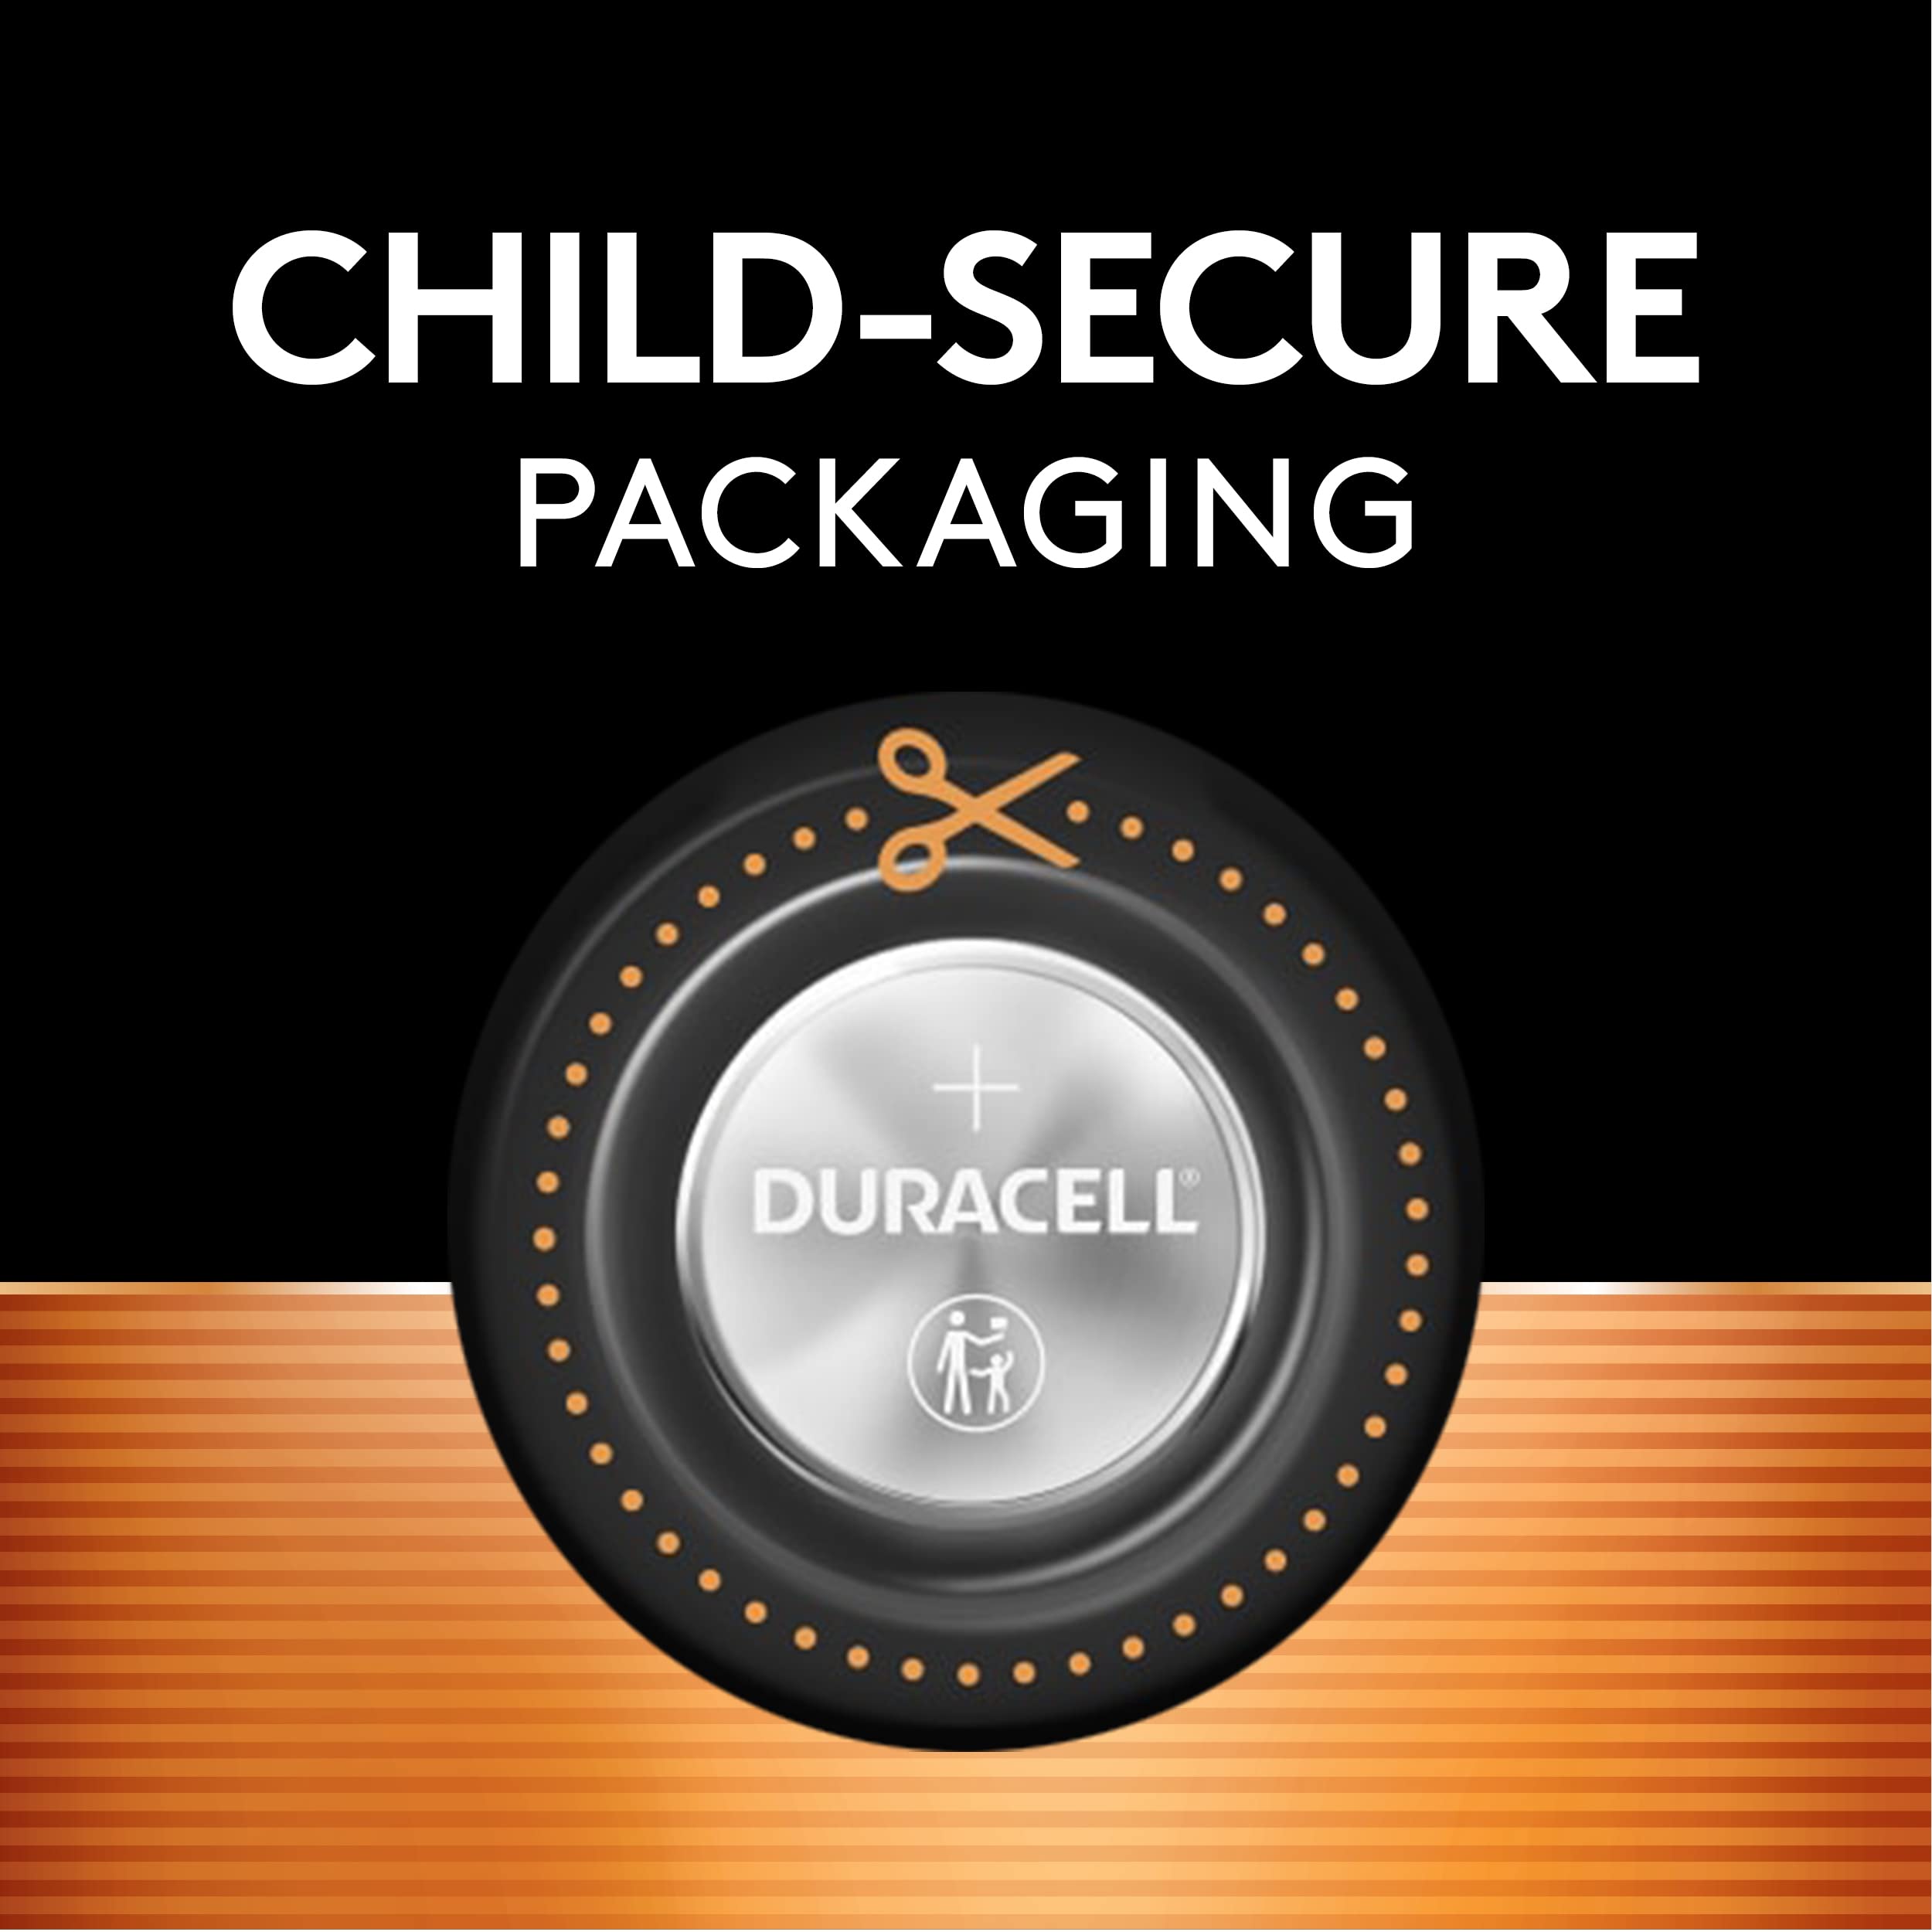 Duracell CR2025 3V Lithium Battery, Child Safety Features, 2 Count Pack, Lithium Coin Battery for Key Fob, Car Remote, Glucose Monitor, CR Lithium 3 Volt Cell